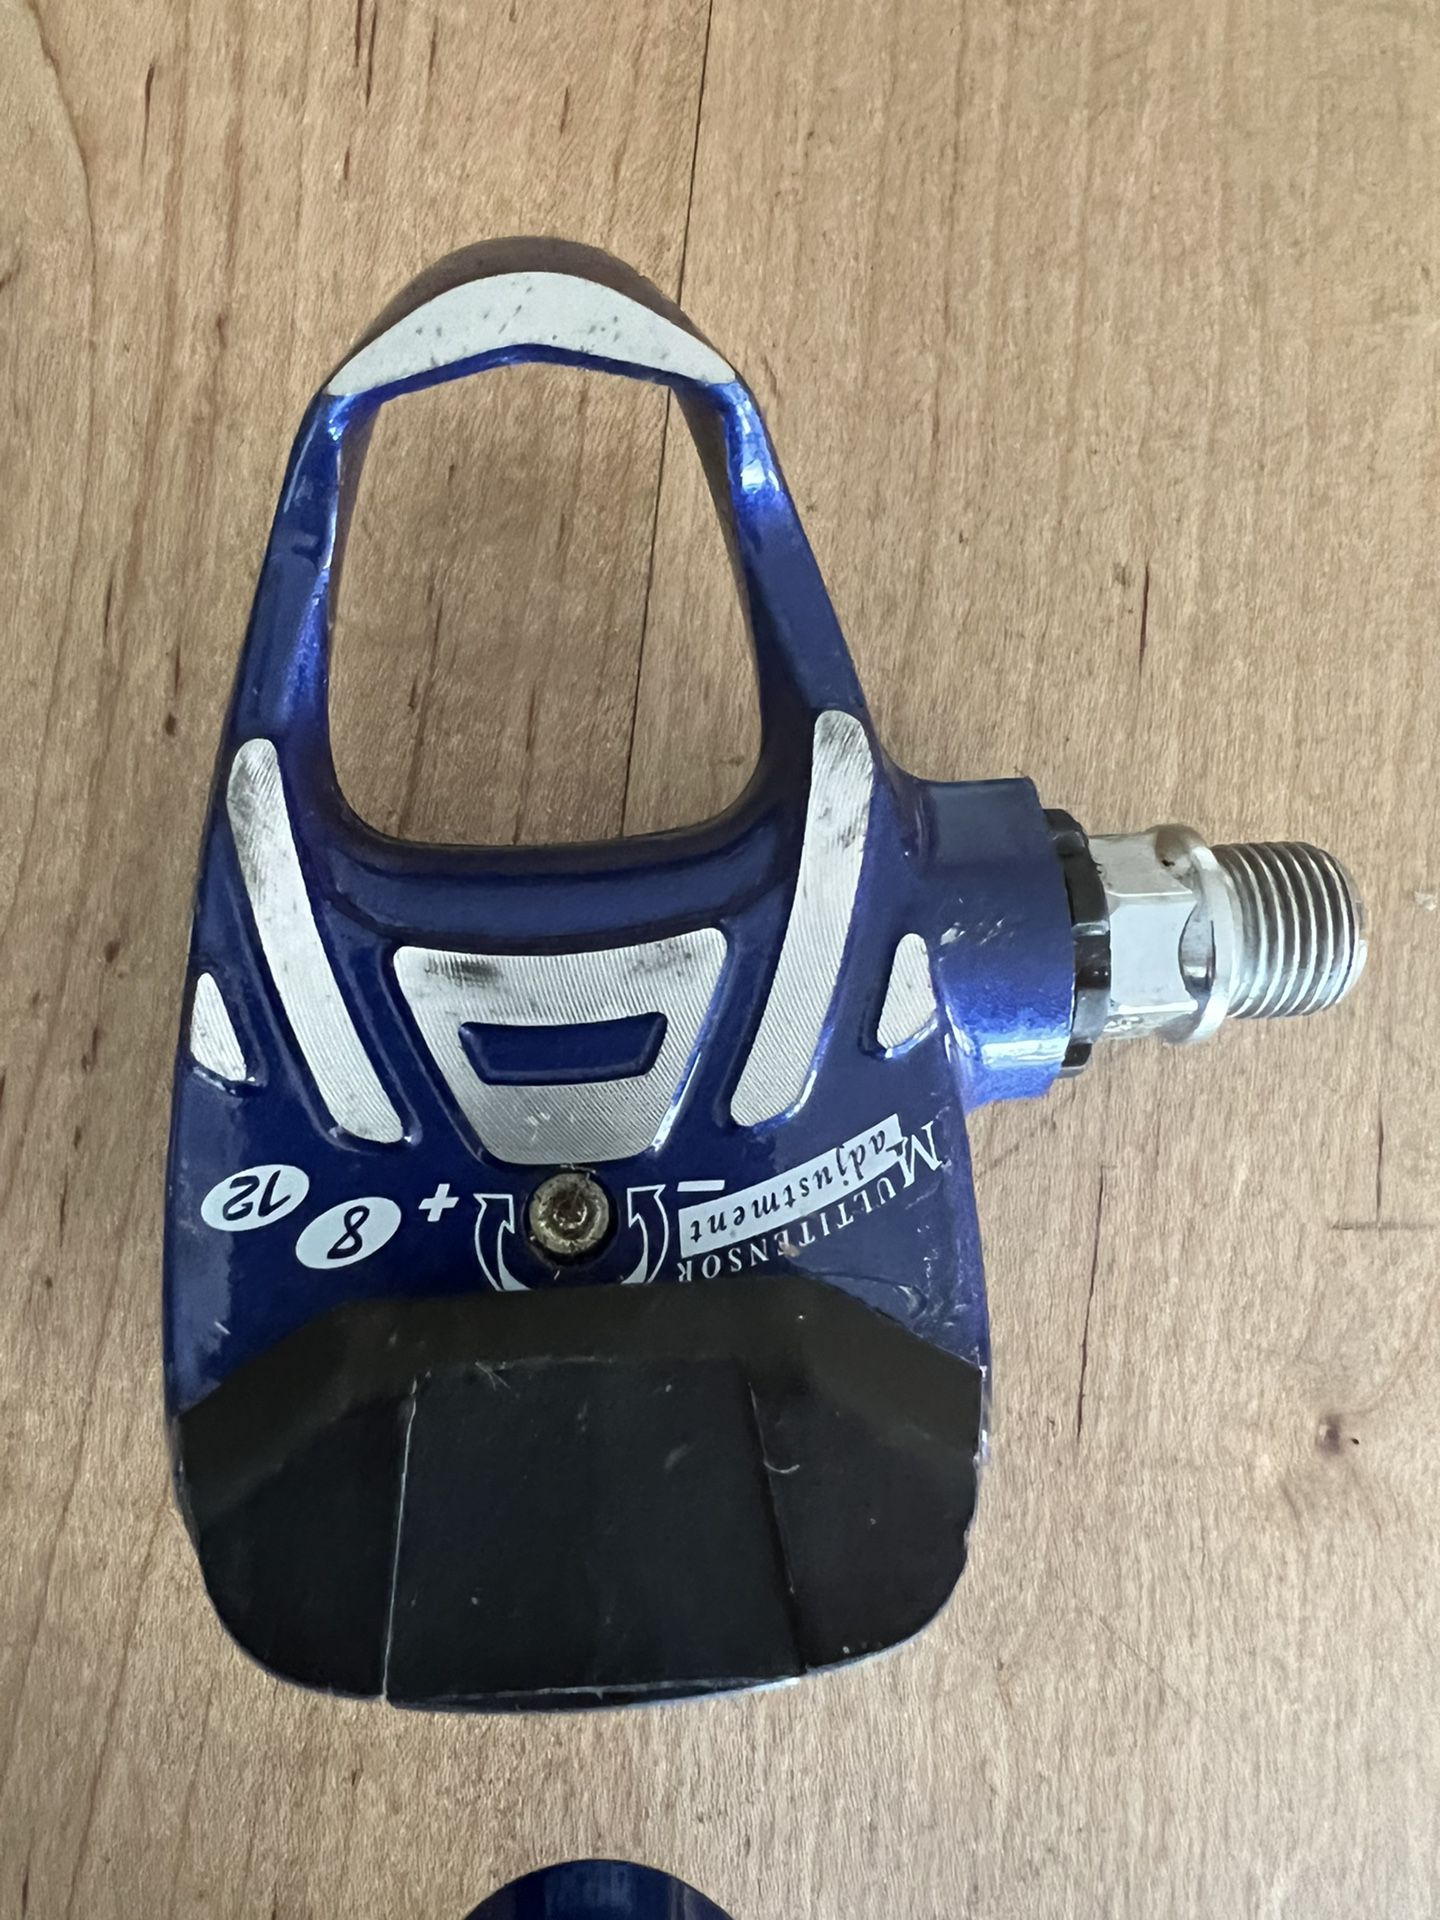 Look Road Cycling Pedals Excellent Condition!